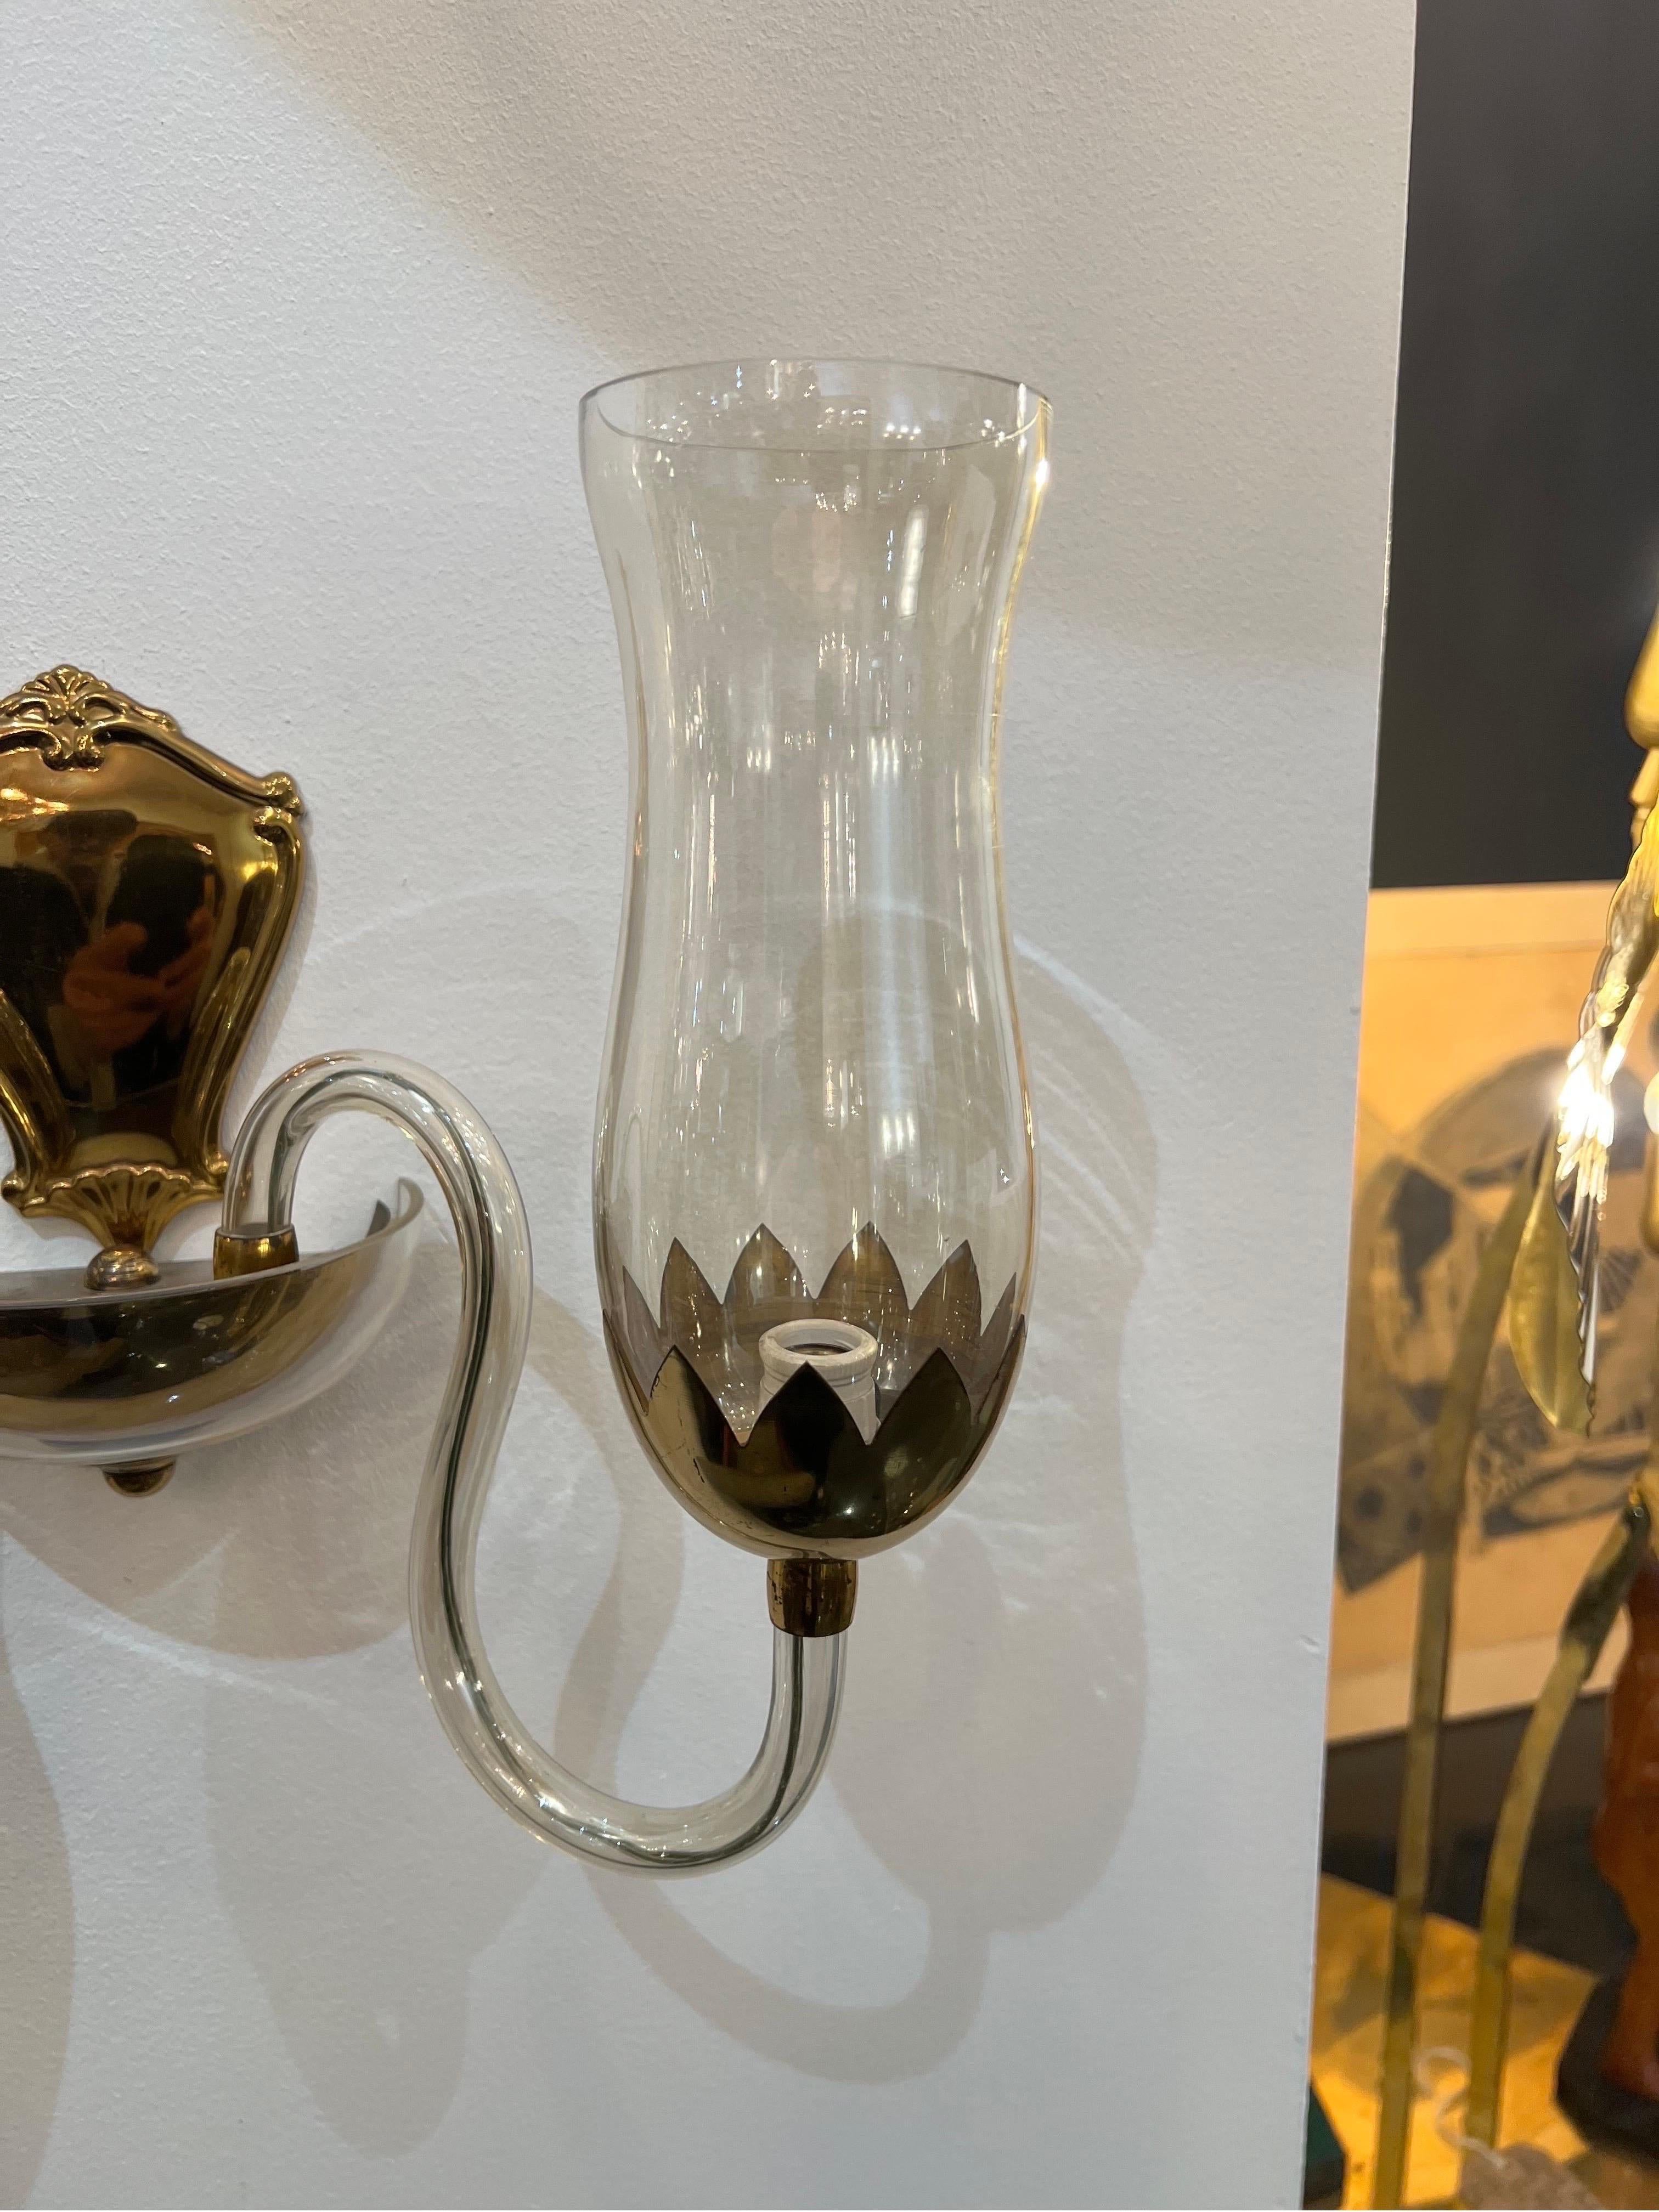 Stunning pair Murano glass wall sconces consisting of two delicately curved arms in gold/amber glass each holding a lantern shaped glass lamp holders with brass detailing. Rare pieces made entirely from hand blown glass supported by elegant brass